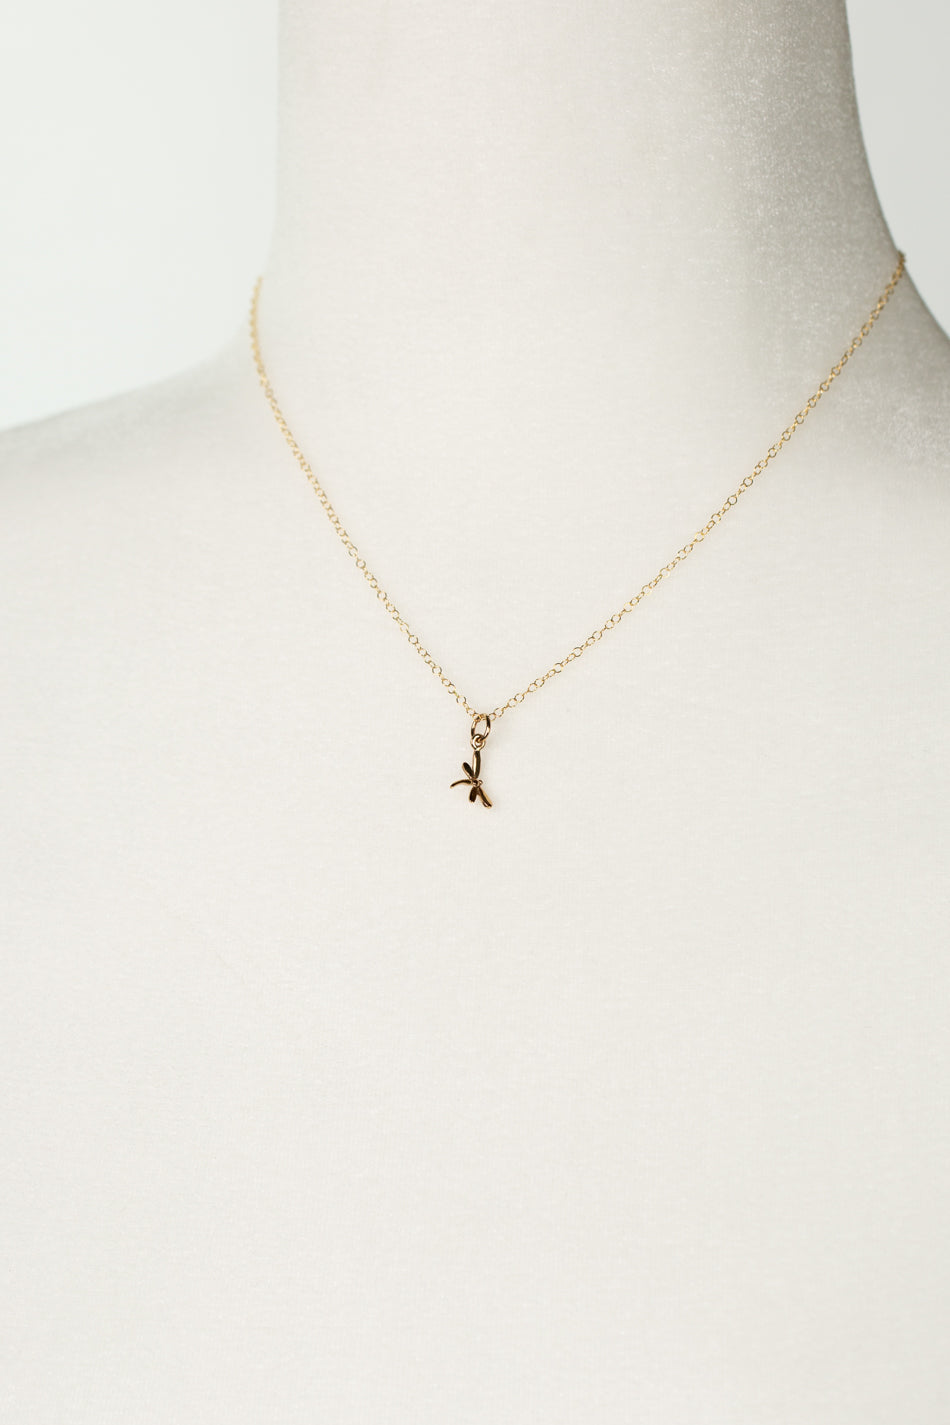 Sentiment 15-17" Gold Petite Dragonfly Necklace